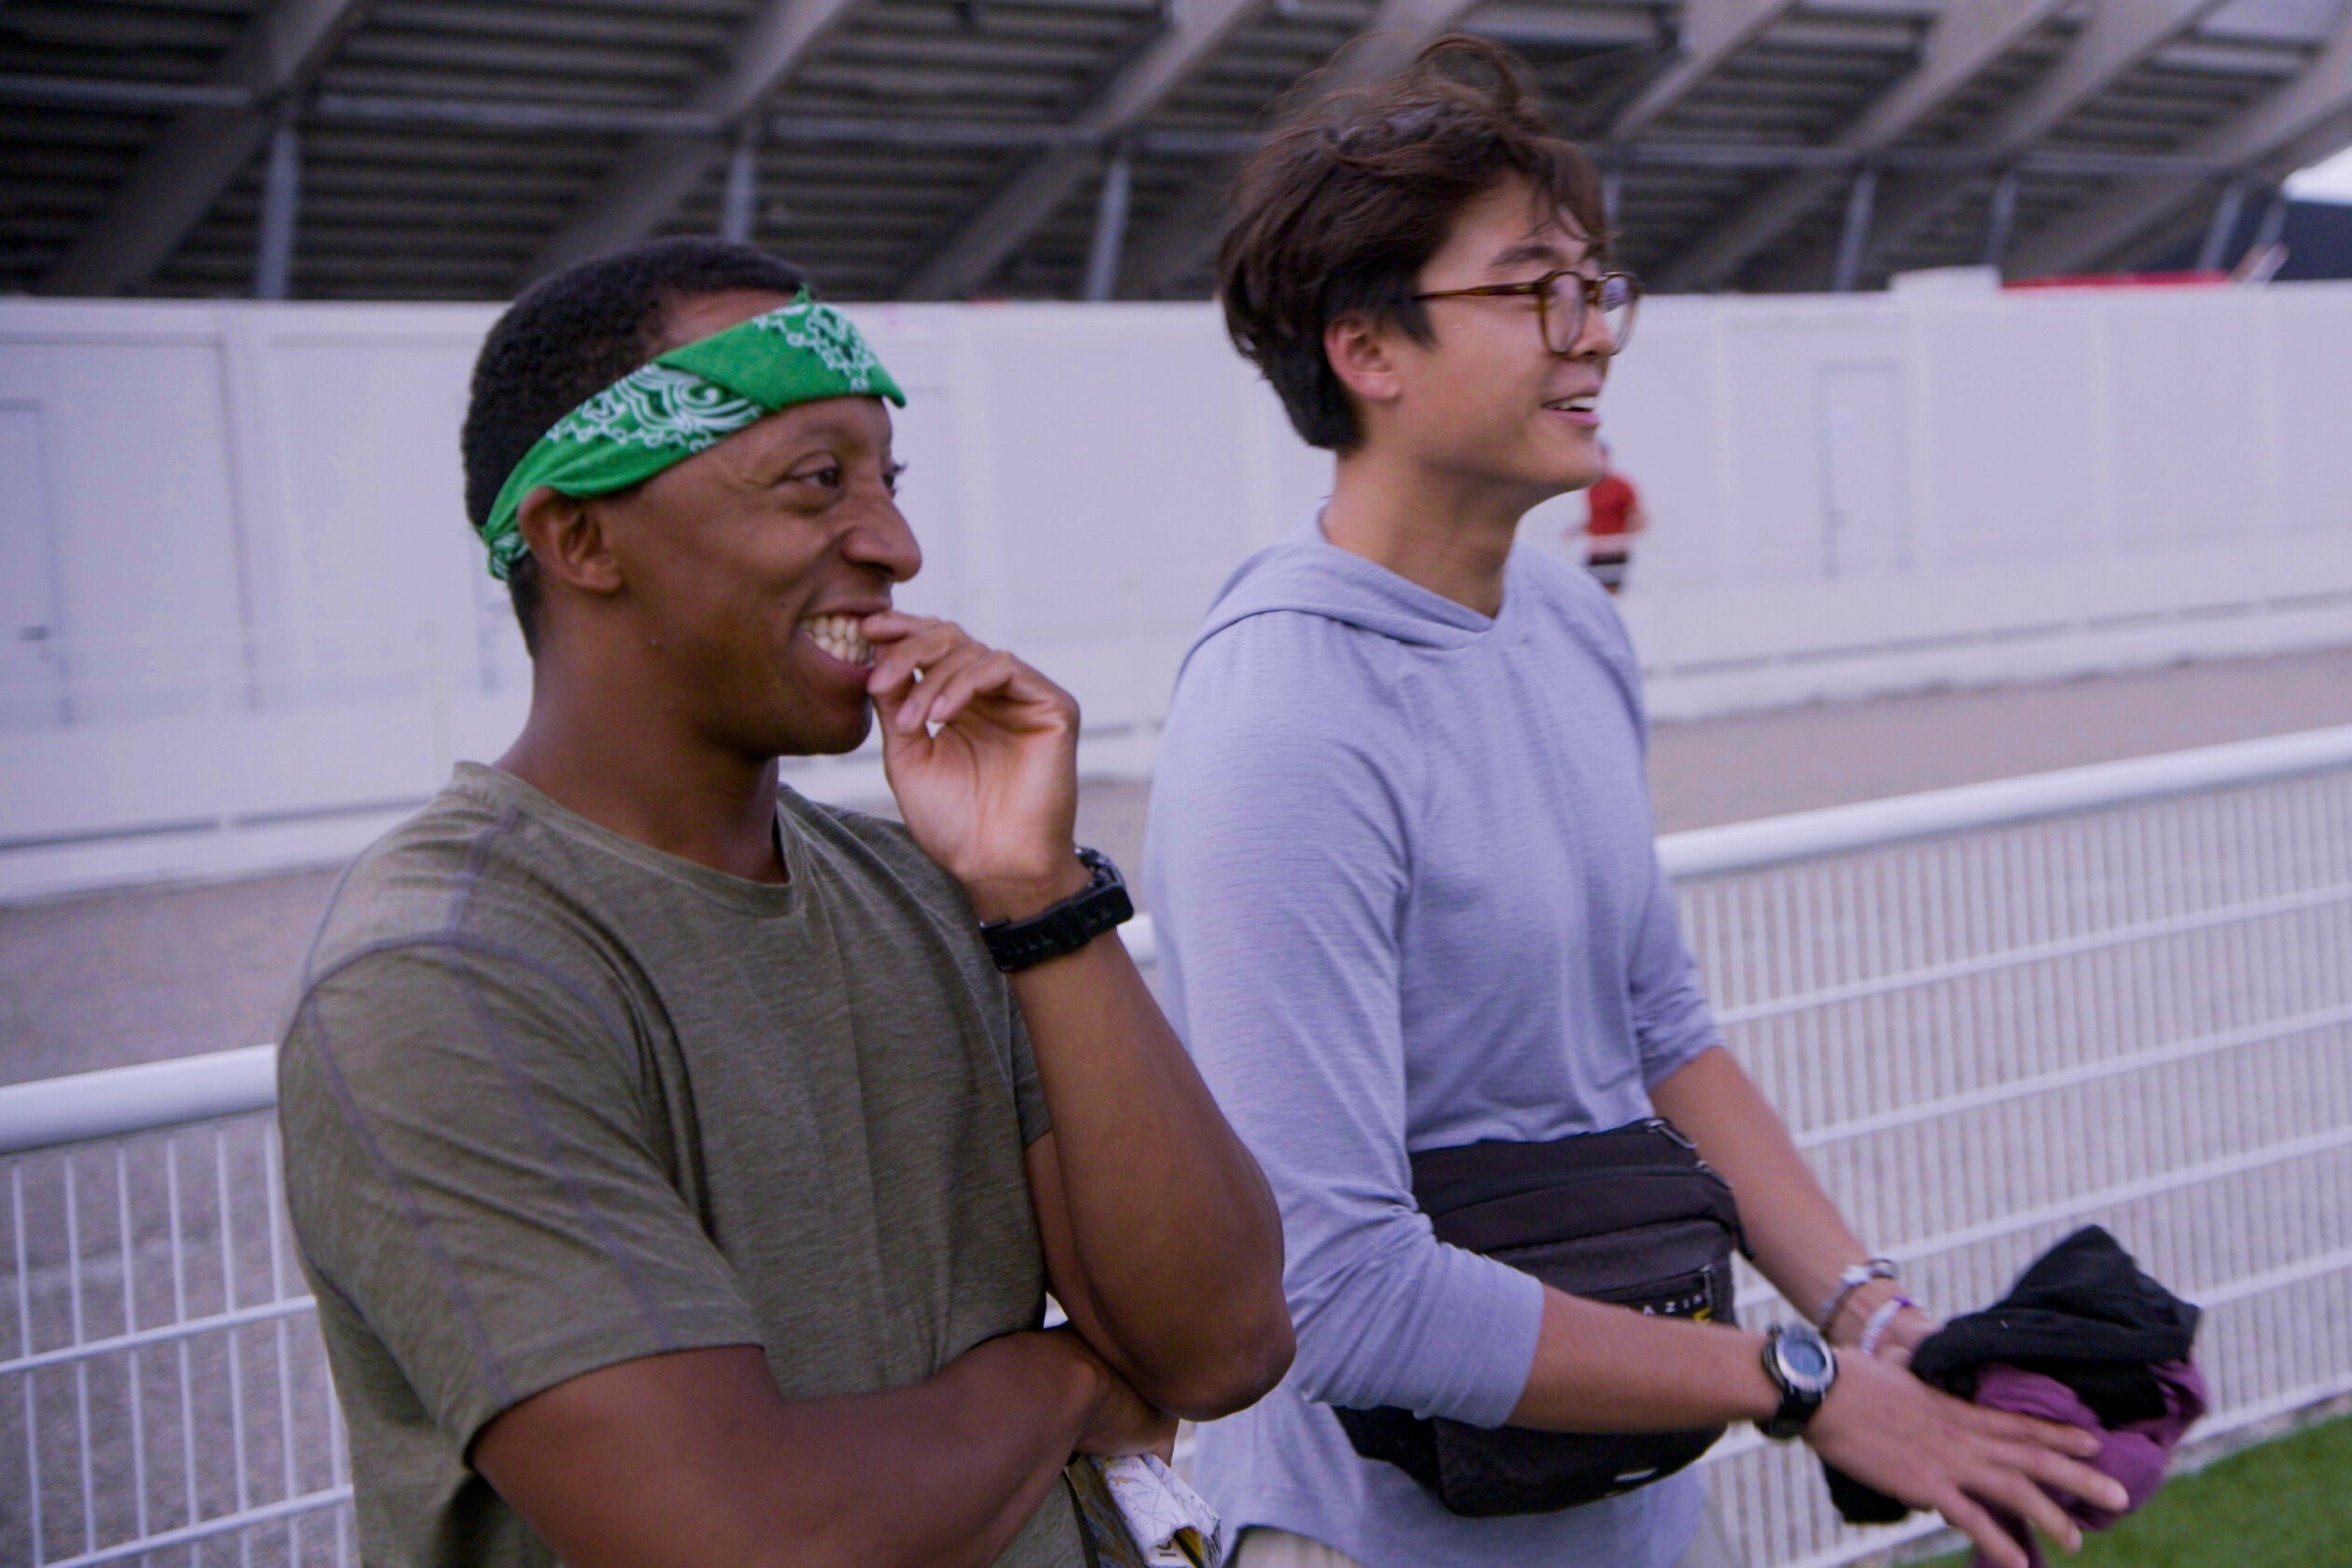 Michael Craig and Derek Xiao, who star in 'The Amazing Race' Seasons 34 on CBS, watch as their partners complete a Roadblock. Michael wears an olive green shirt and green bandana. Derek wears a light blue hoodie and black fanny pack.